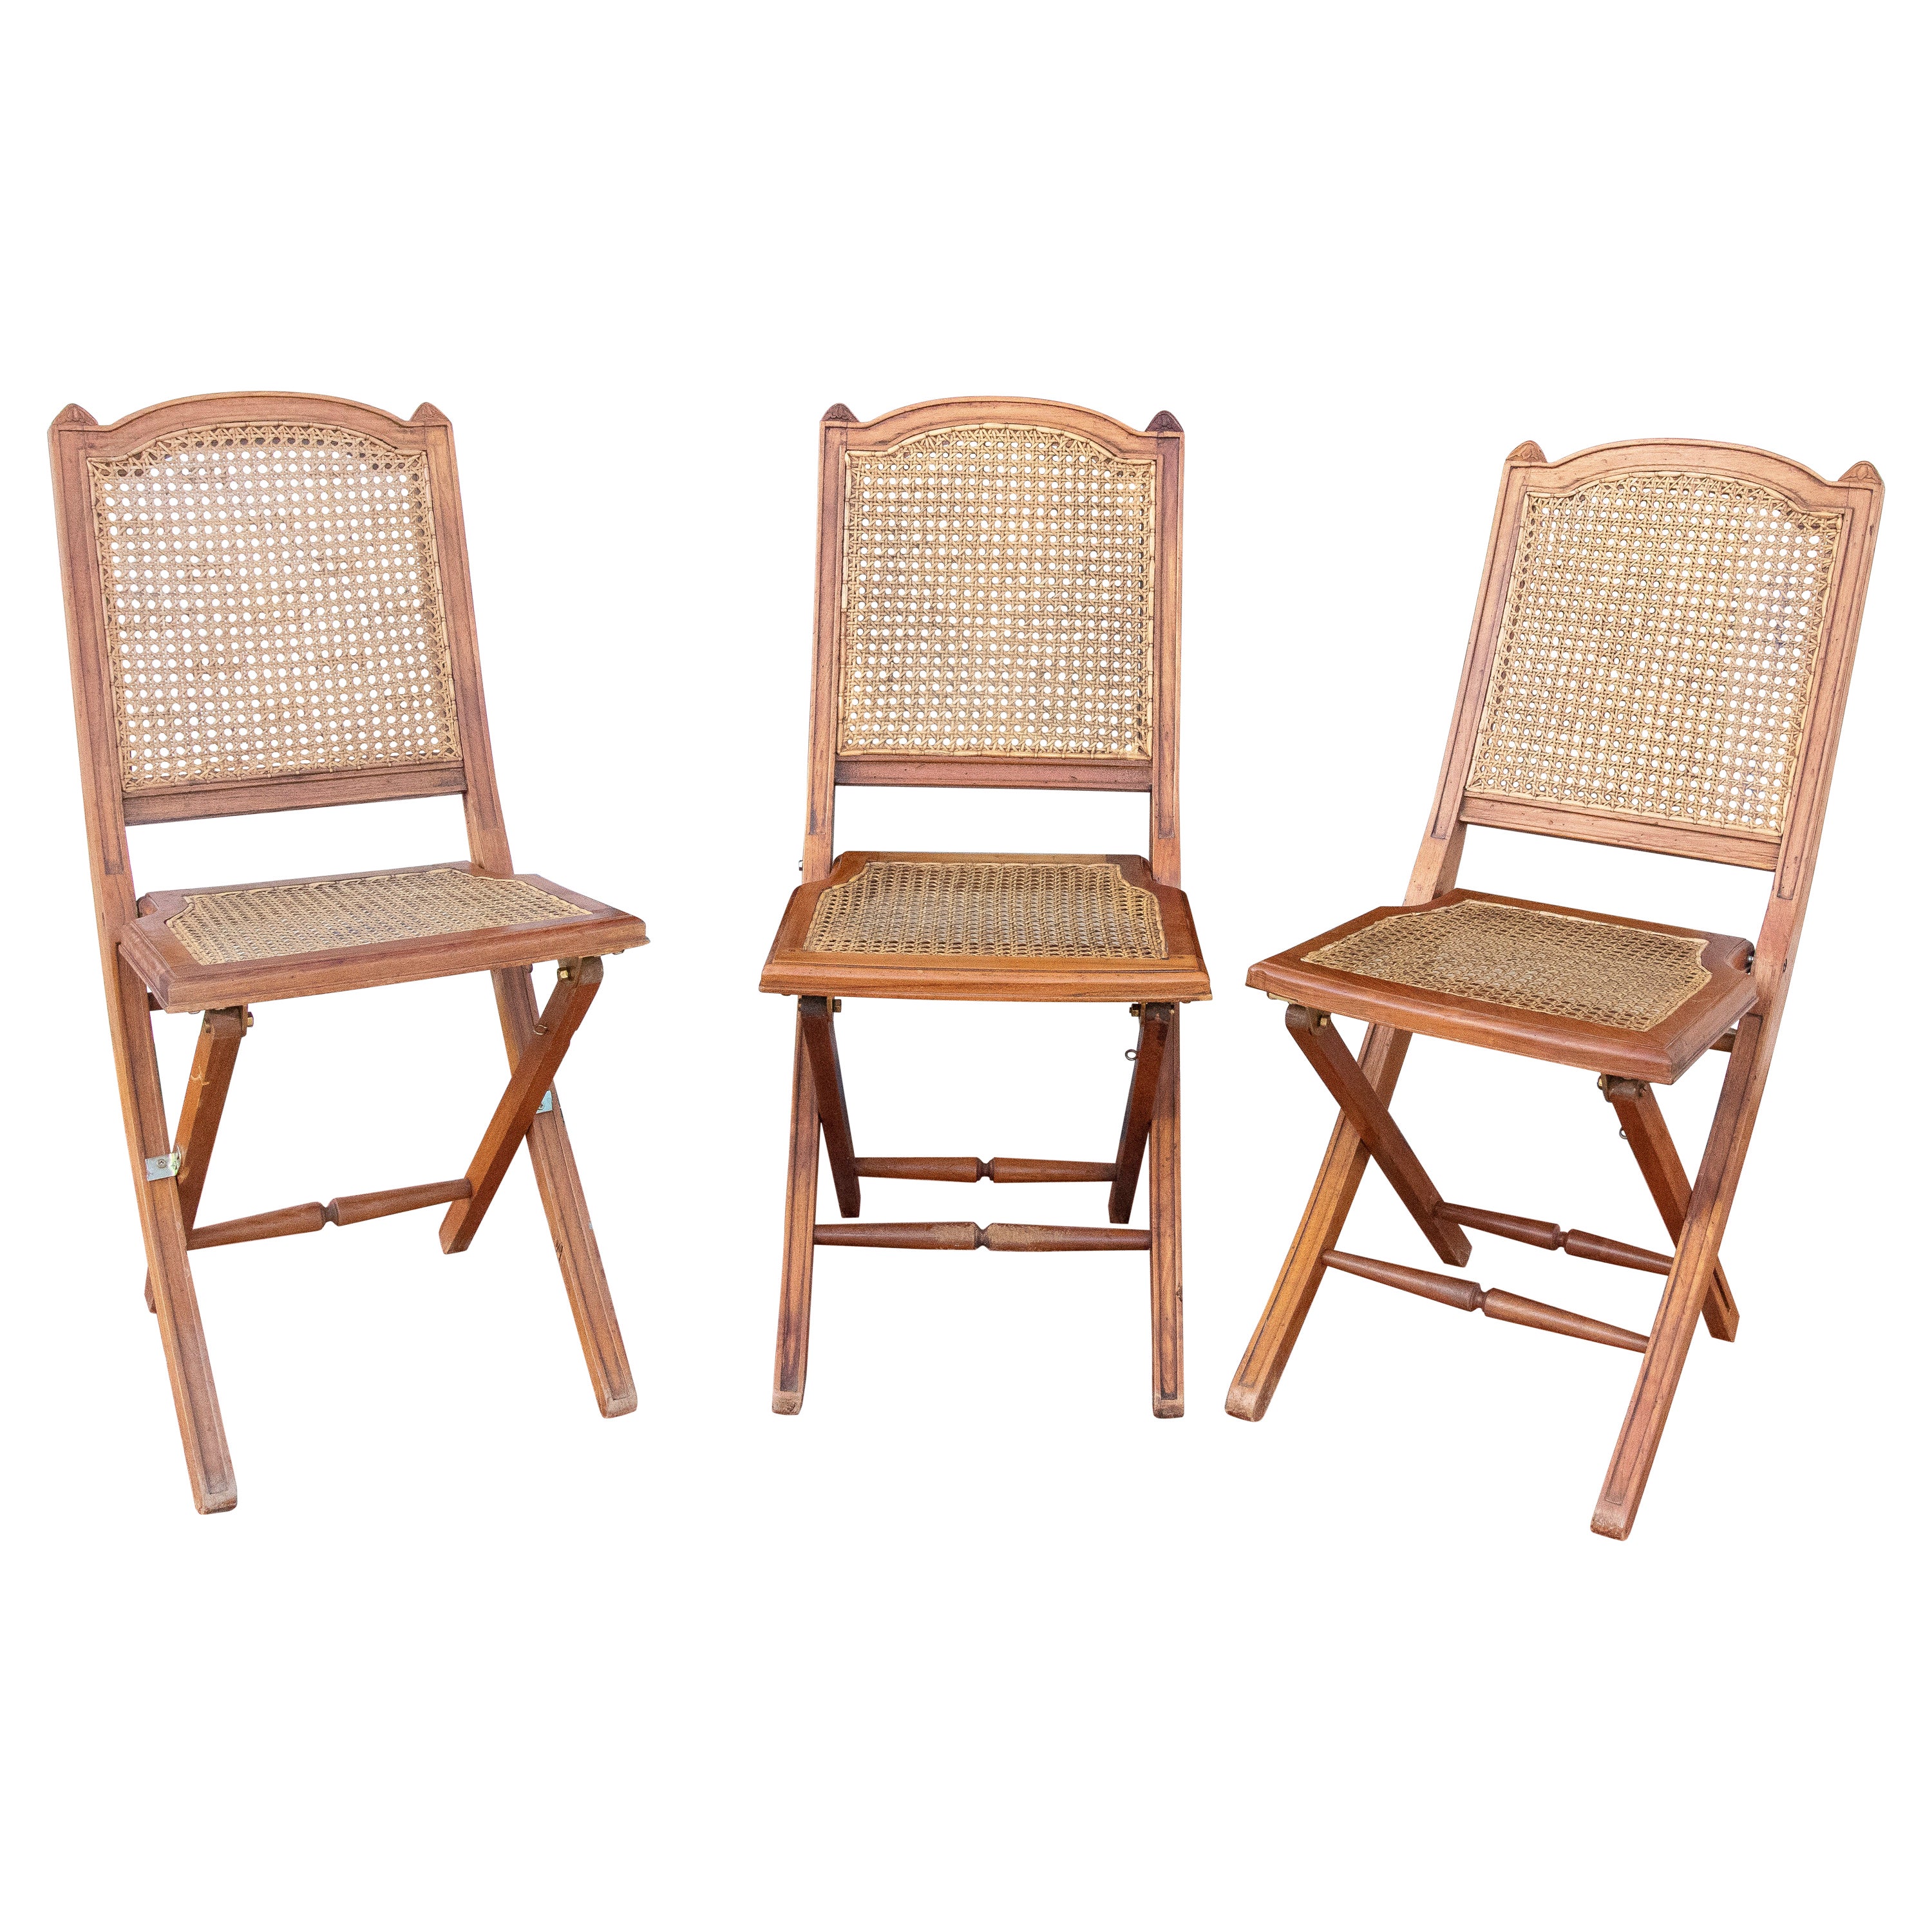 1970s Set of Three Wooden Folding Chairs with Backrest and Seat Mesh For Sale